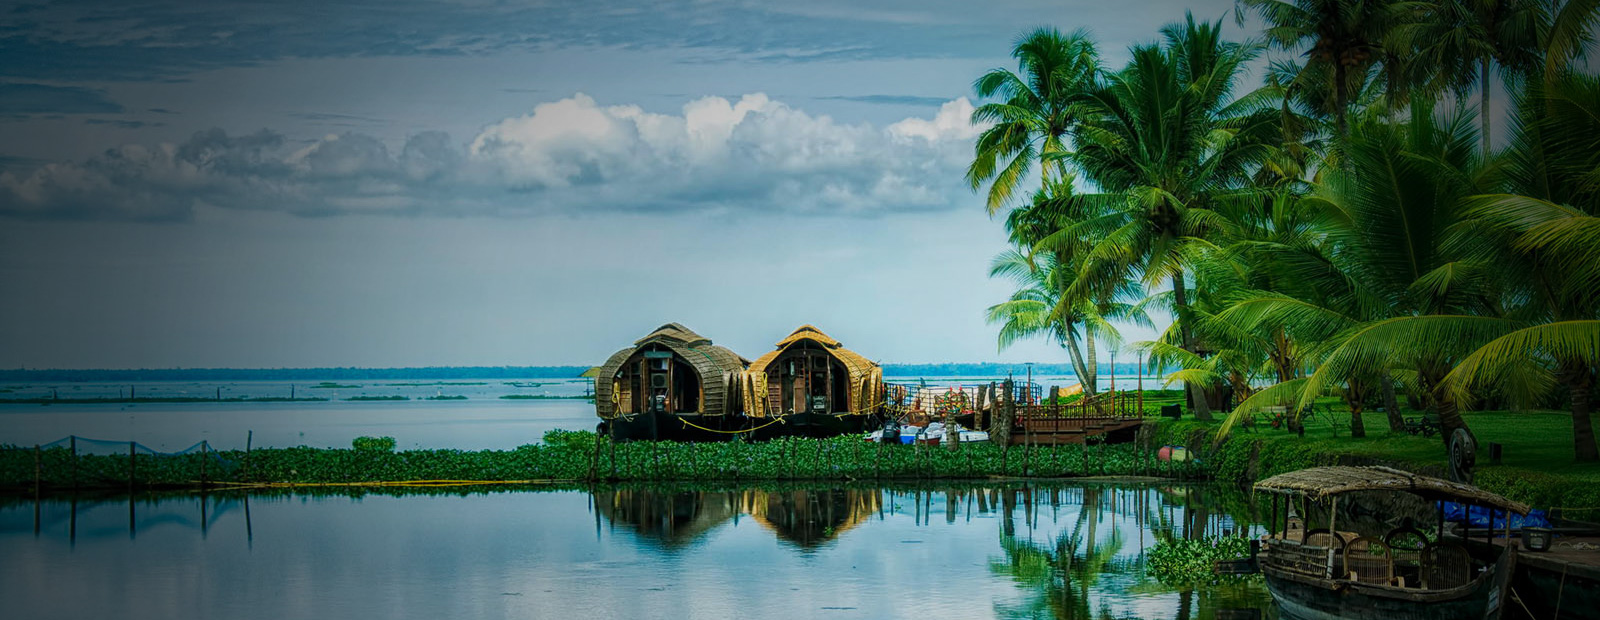 Alleppey Beach Paradise Houseboats